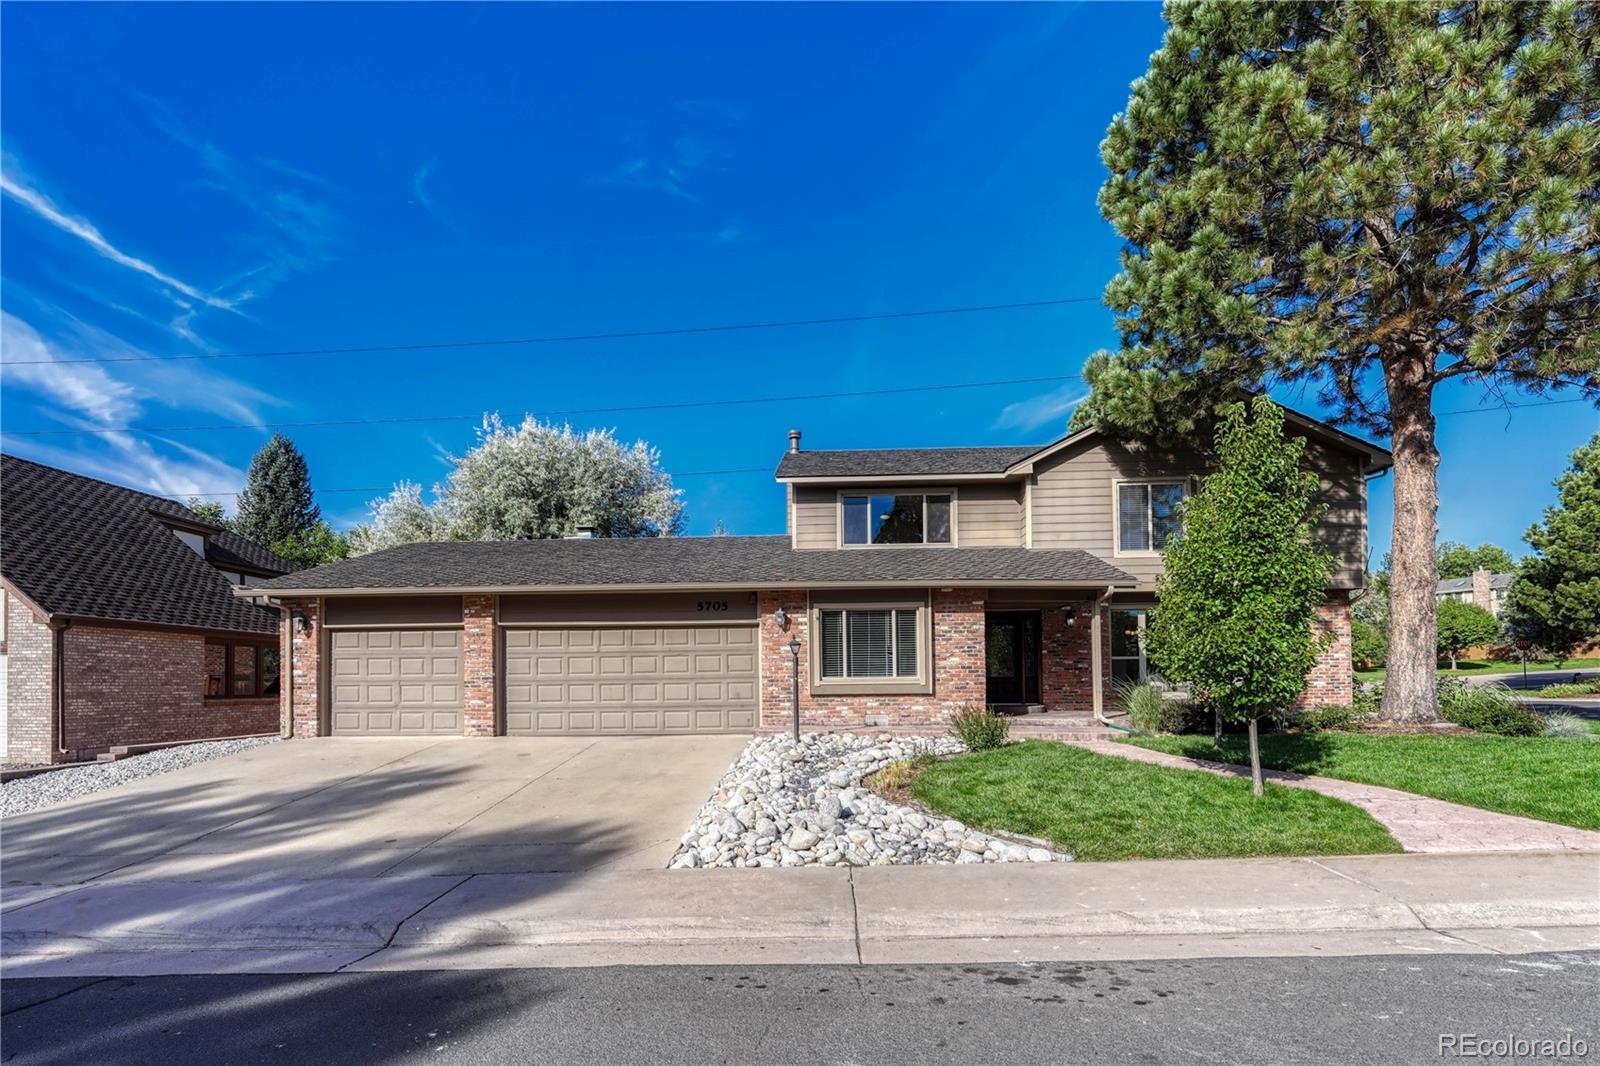 5705 s pagosa way, centennial sold home. Closed on 2023-12-08 for $665,000.